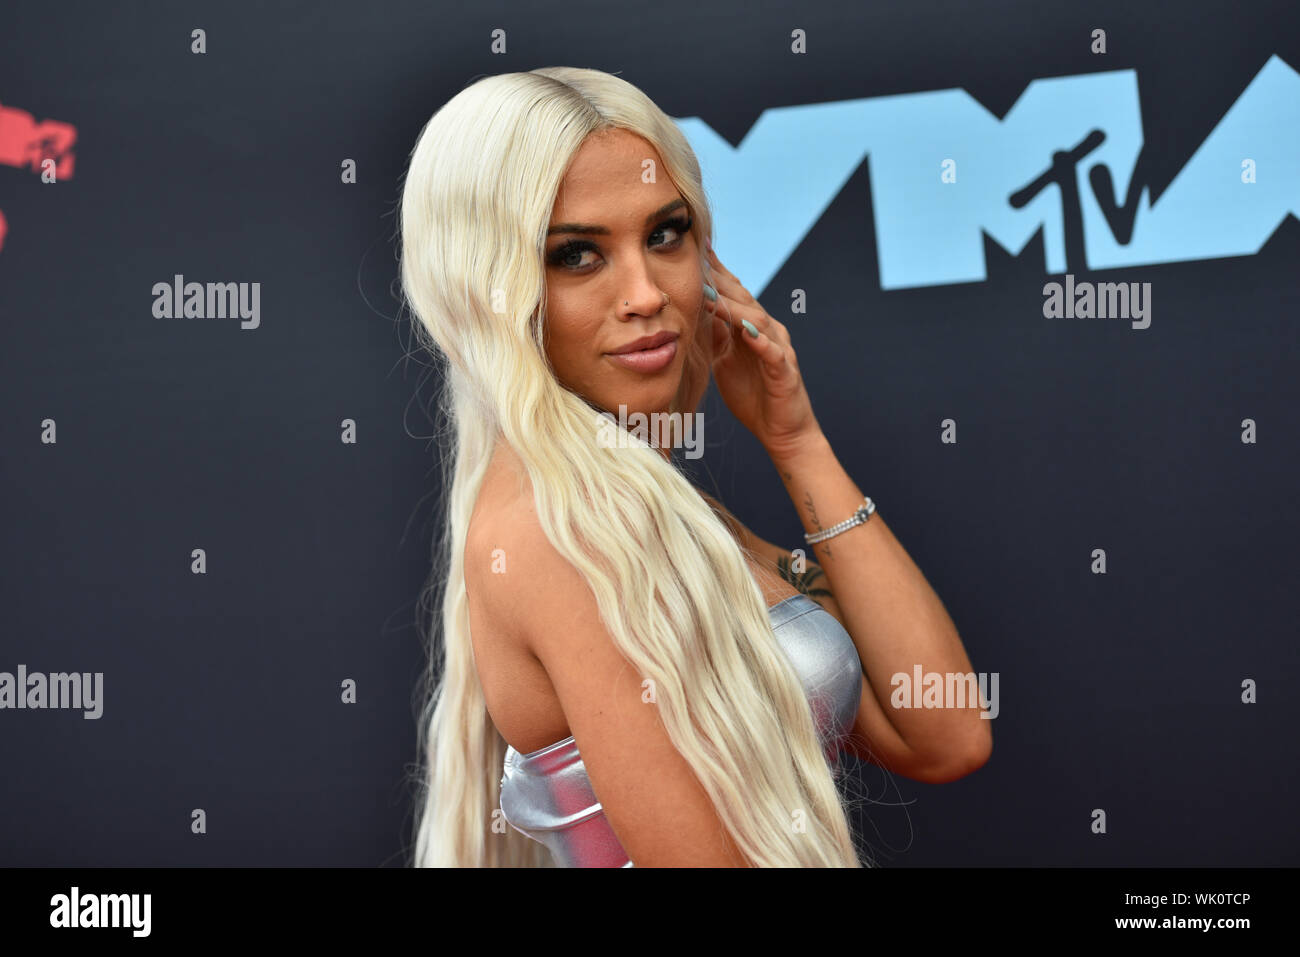 Tammy Hembrow attends the 2019 MTV Video Music Awards at Prudential Center on August 26, 2019 in Newark, New Jersey. Stock Photo